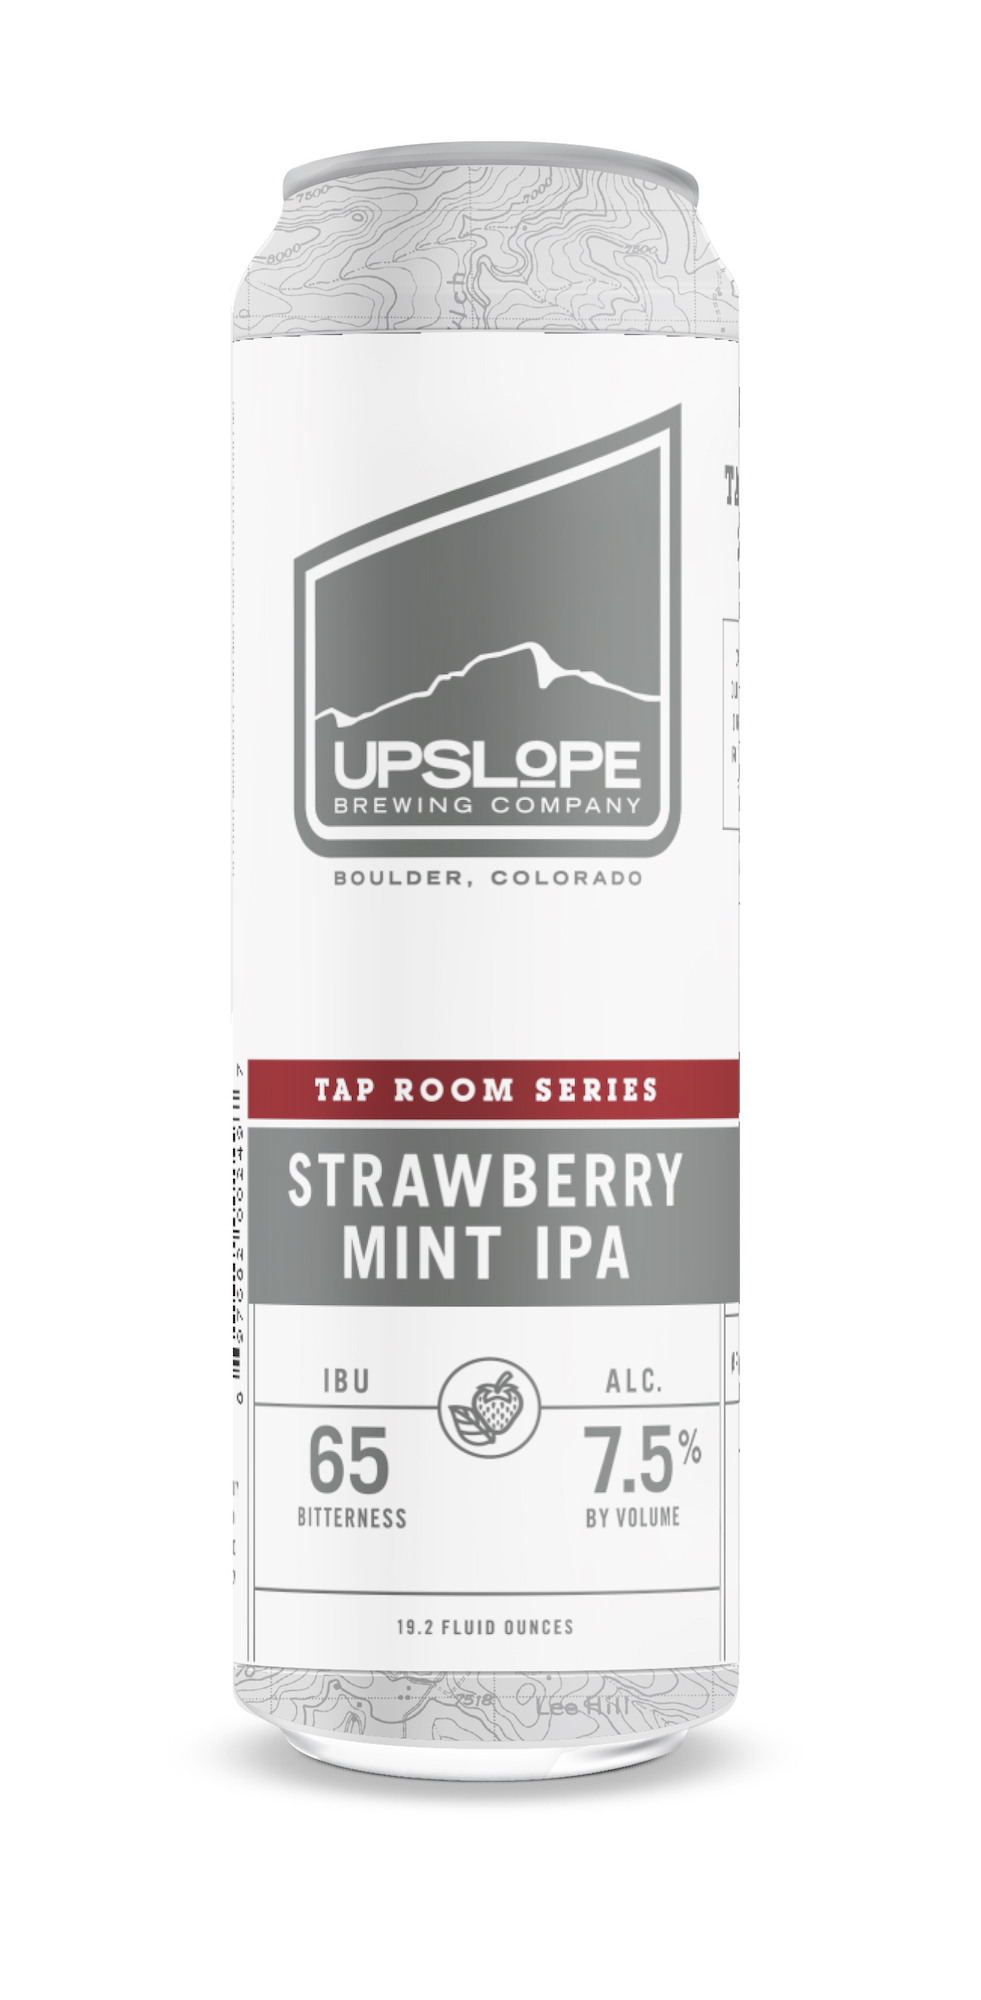 Tap Room Series-Strawberry Mint IPA-19-2 oz can